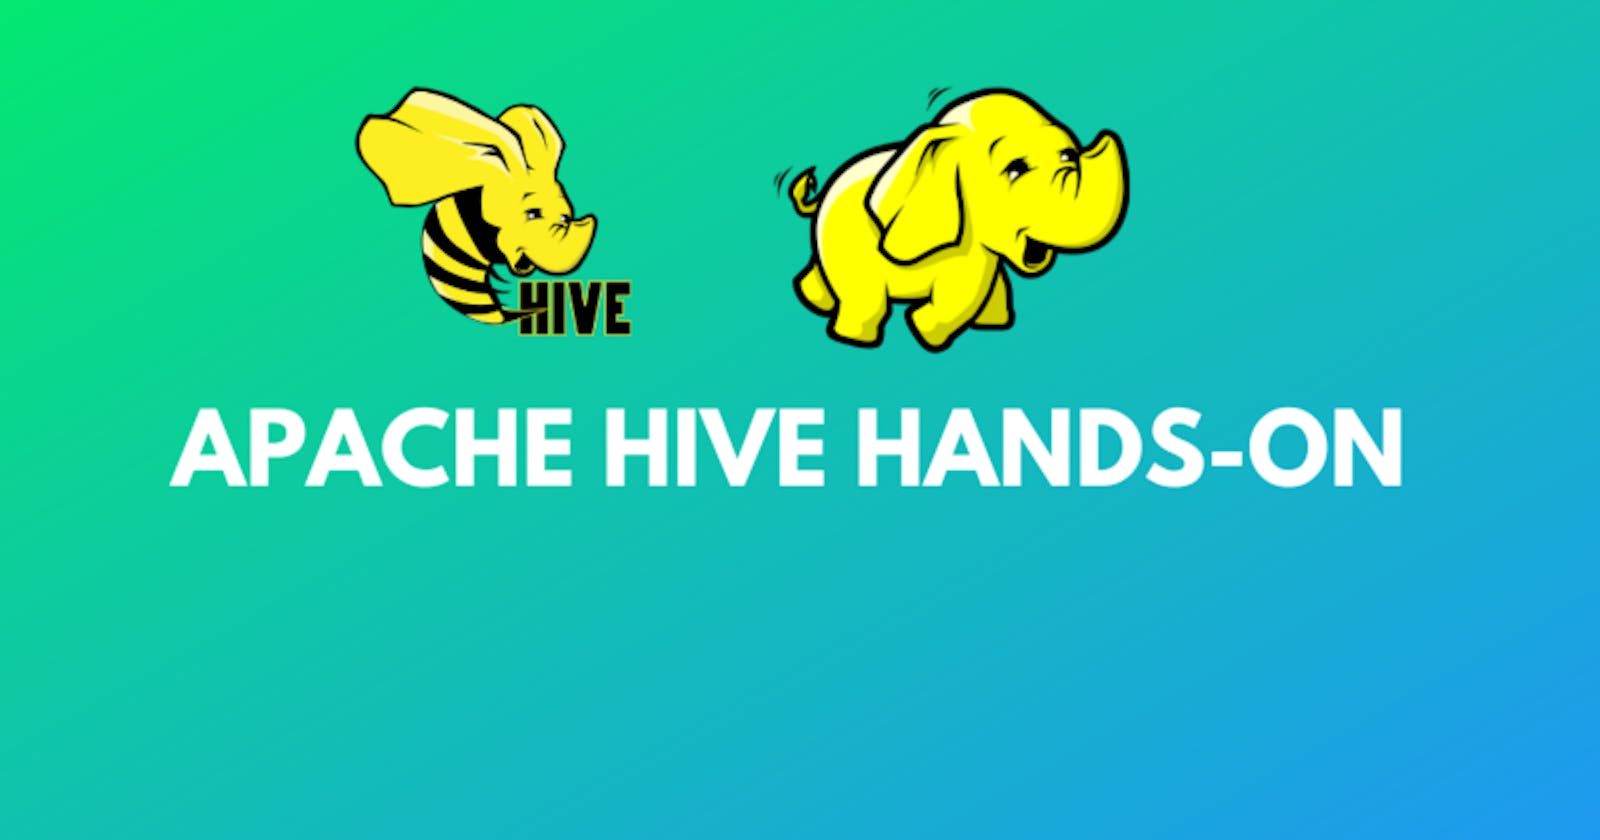 Apache Hive Hands-on